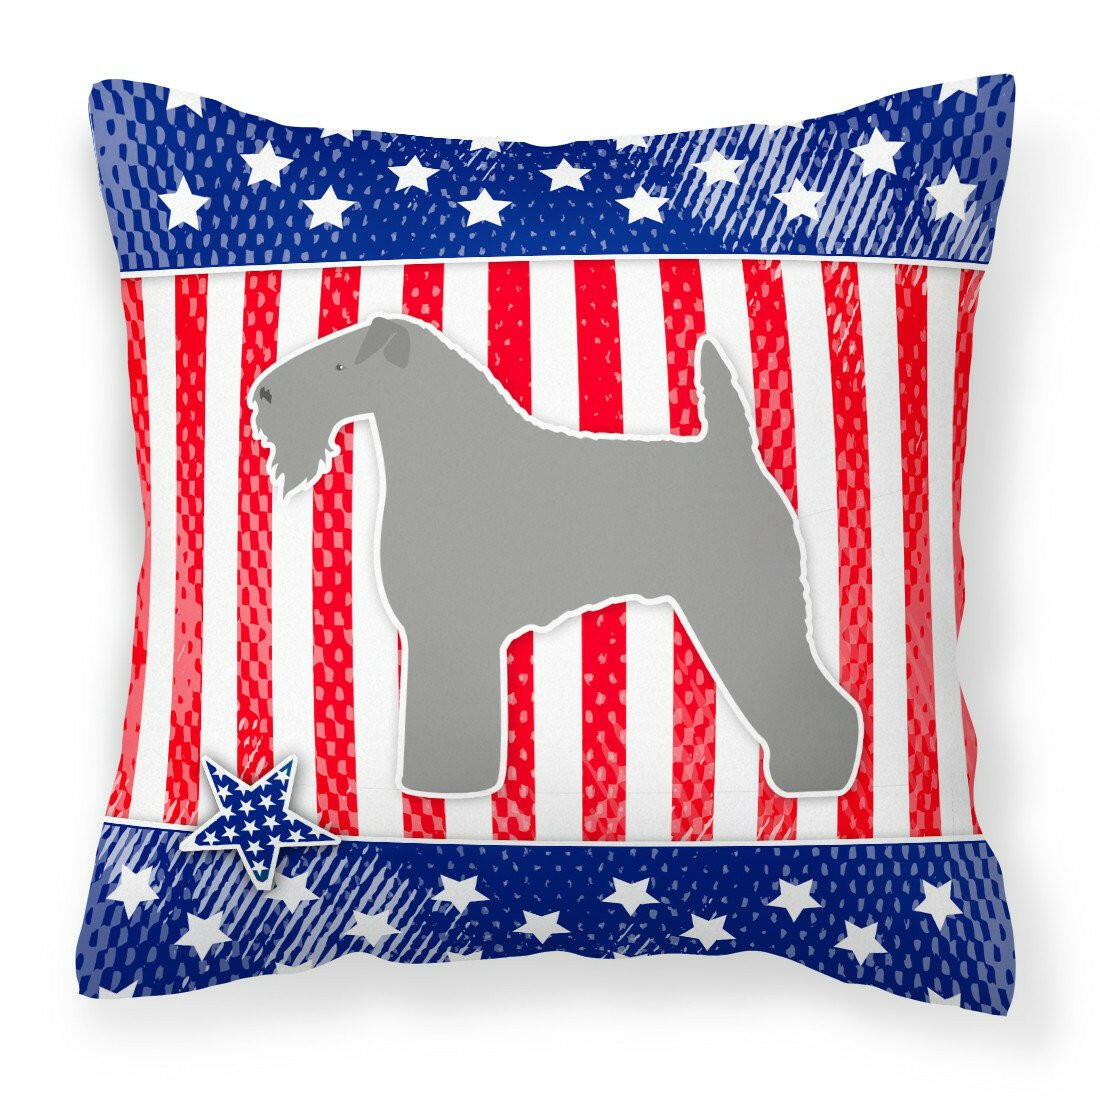 USA Patriotic Kerry Blue Terrier Fabric Decorative Pillow BB3292PW1818 by Caroline's Treasures